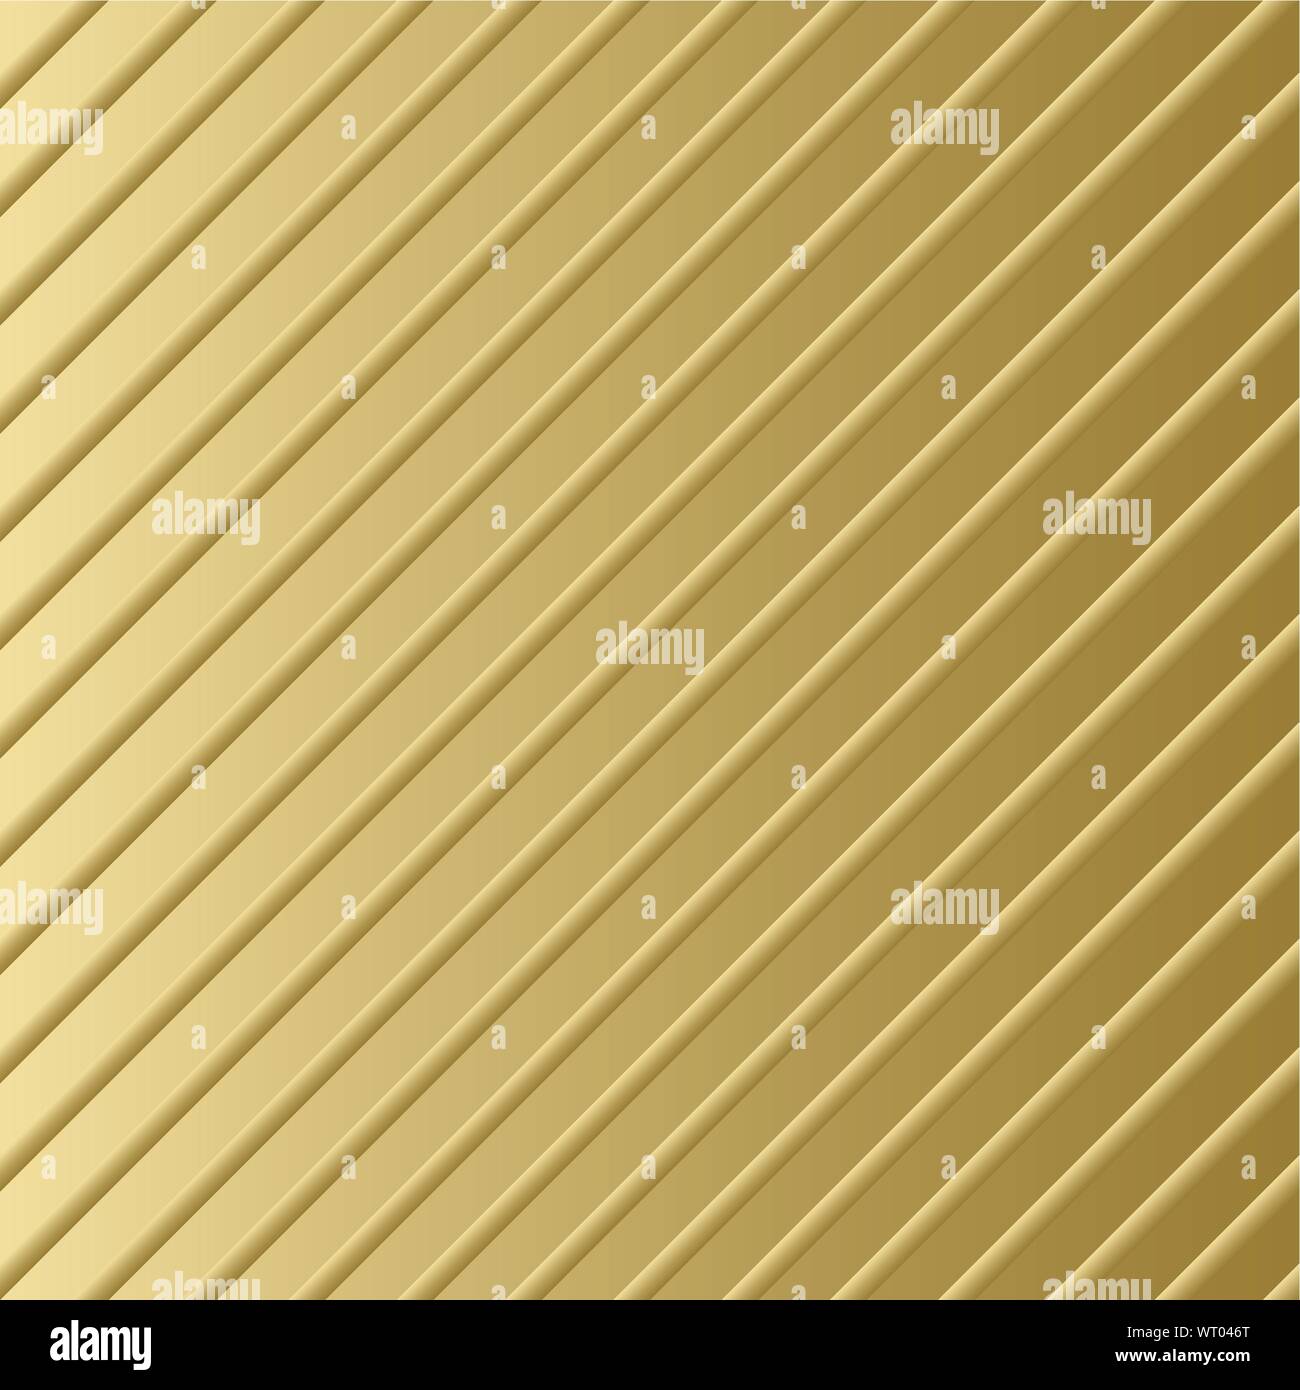 Golden background. Vector luxury pattern with gold diagonal stripes Stock Vector